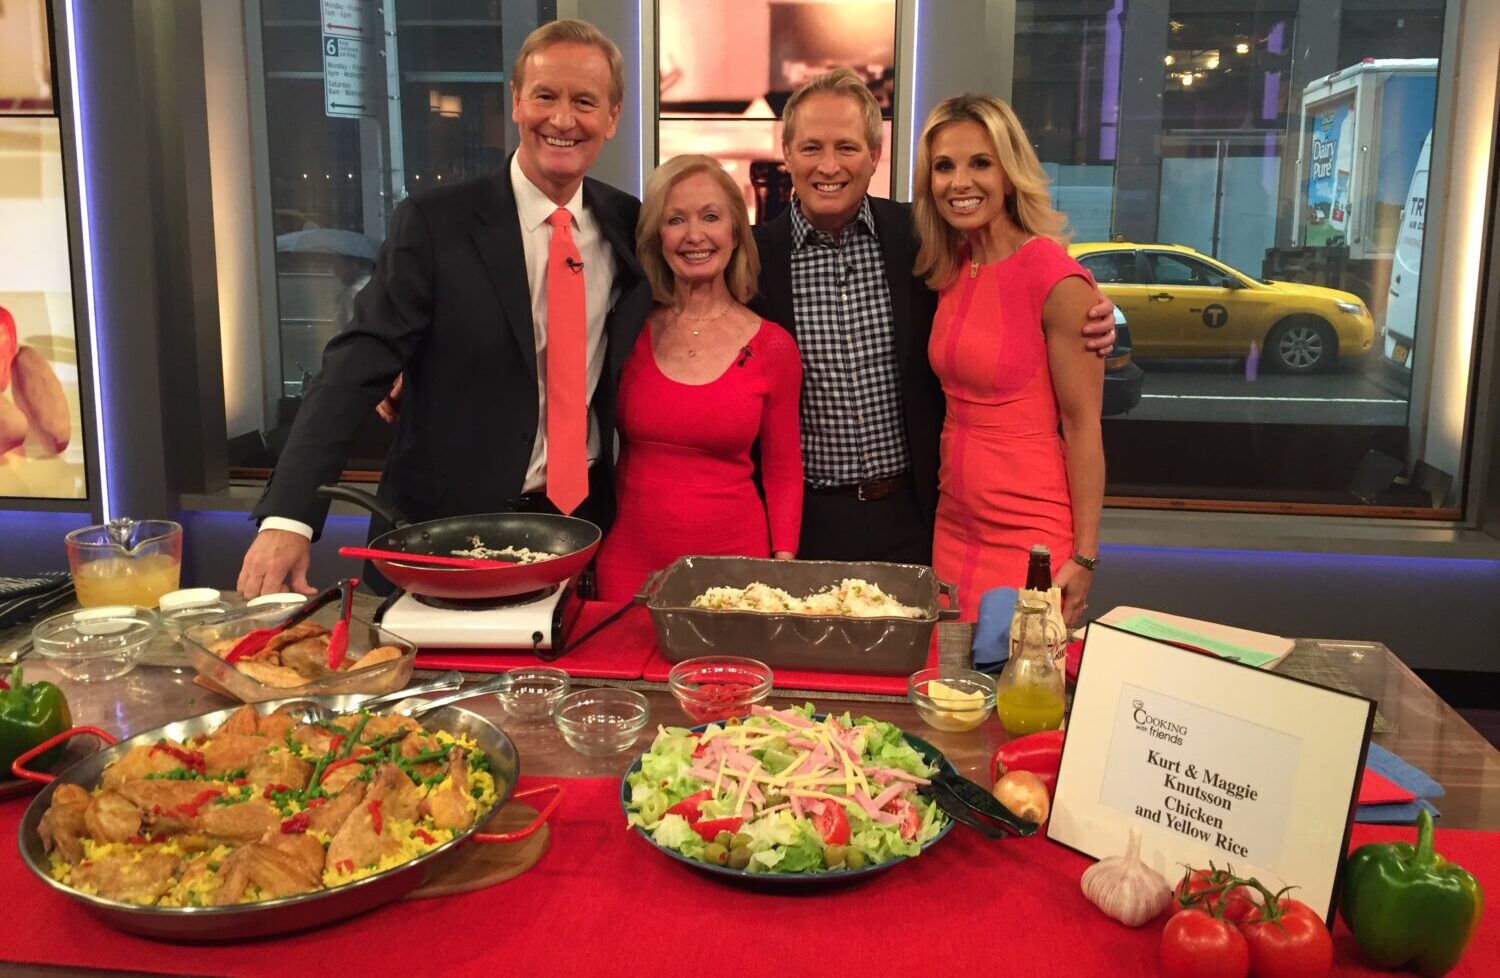 Kurt Knutsson On Fox And Friends With Steve Doocy And Elizabeth Hasselbeck